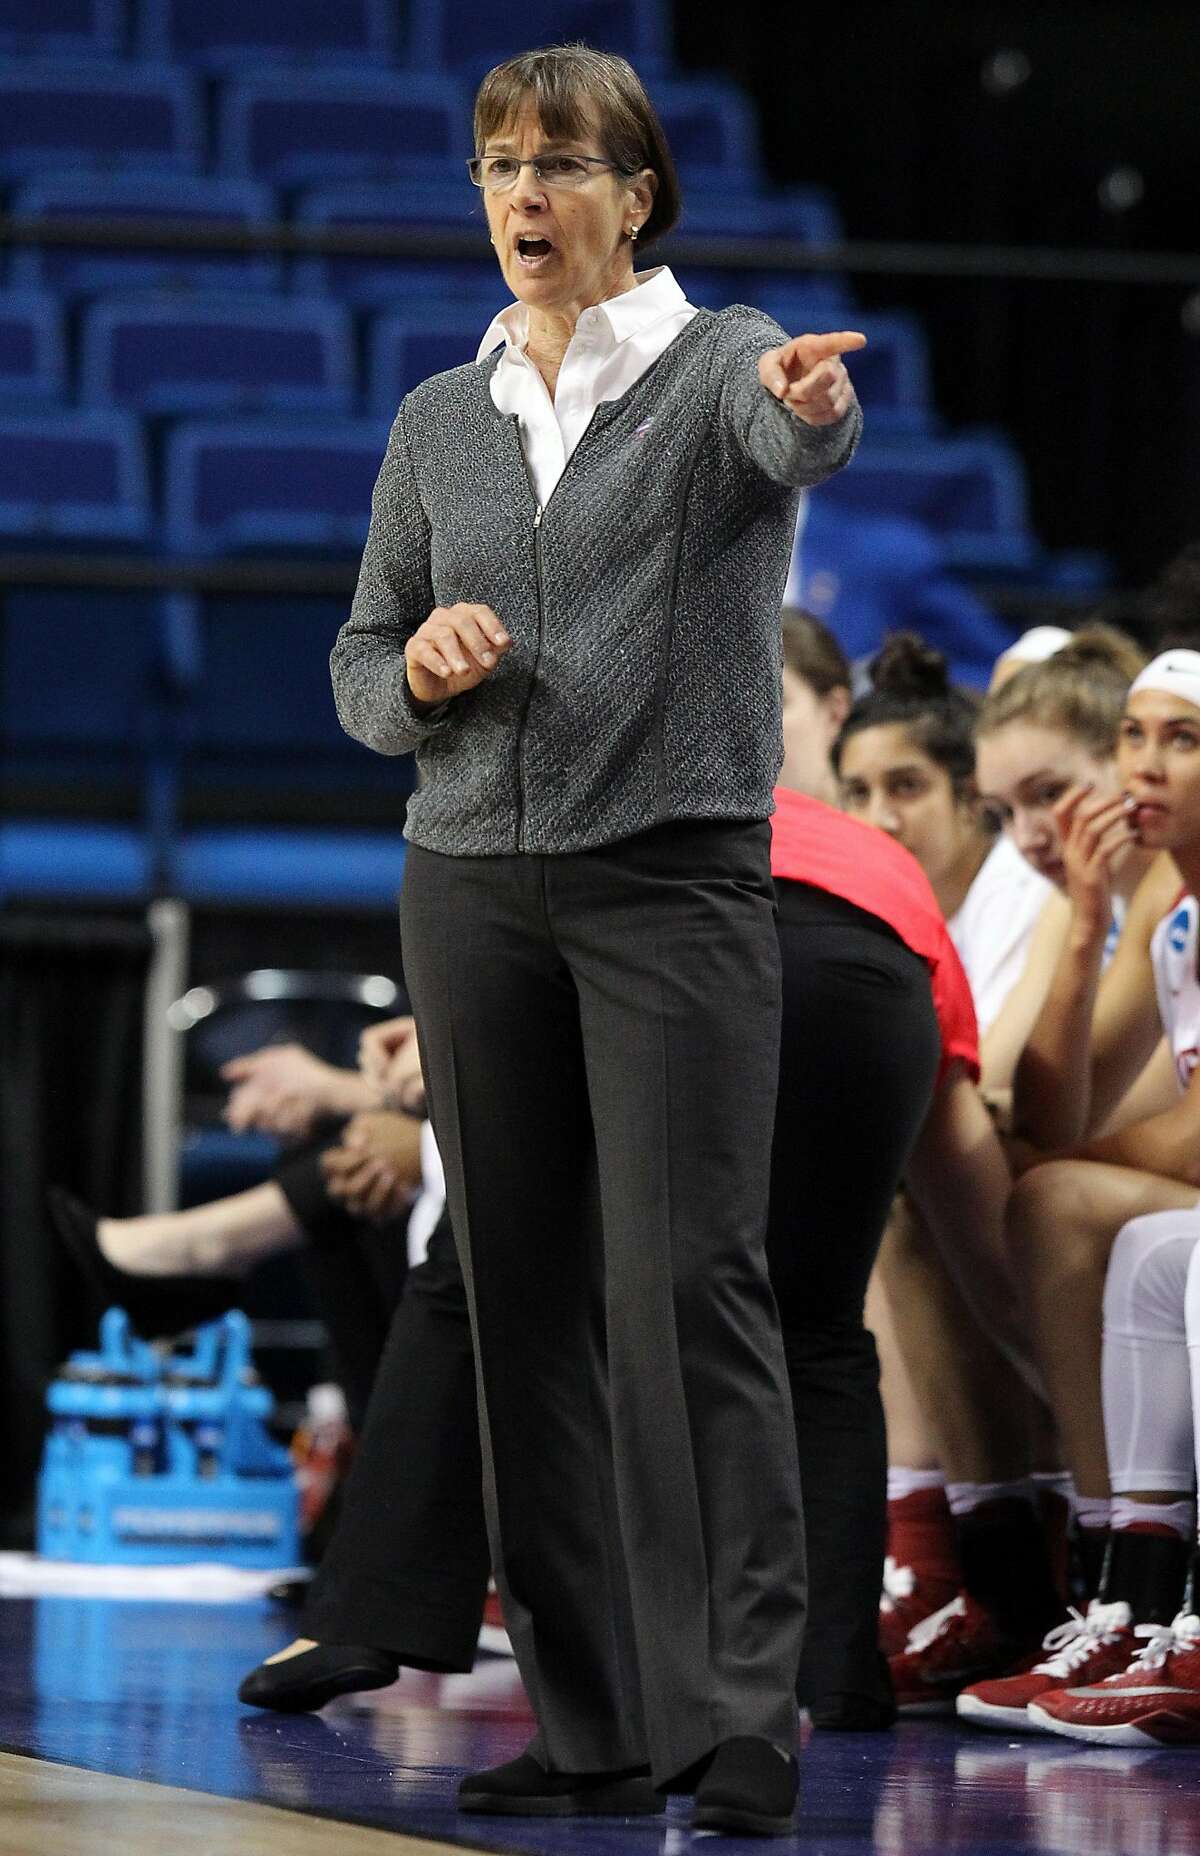 Stanford head coachTara VanDerveer directs her team during a regional final women's college basketball game in the NCAA Tournament against Washington in Lexington, Ky., Sunday, March 27, 2016. (AP Photo/James Crisp)